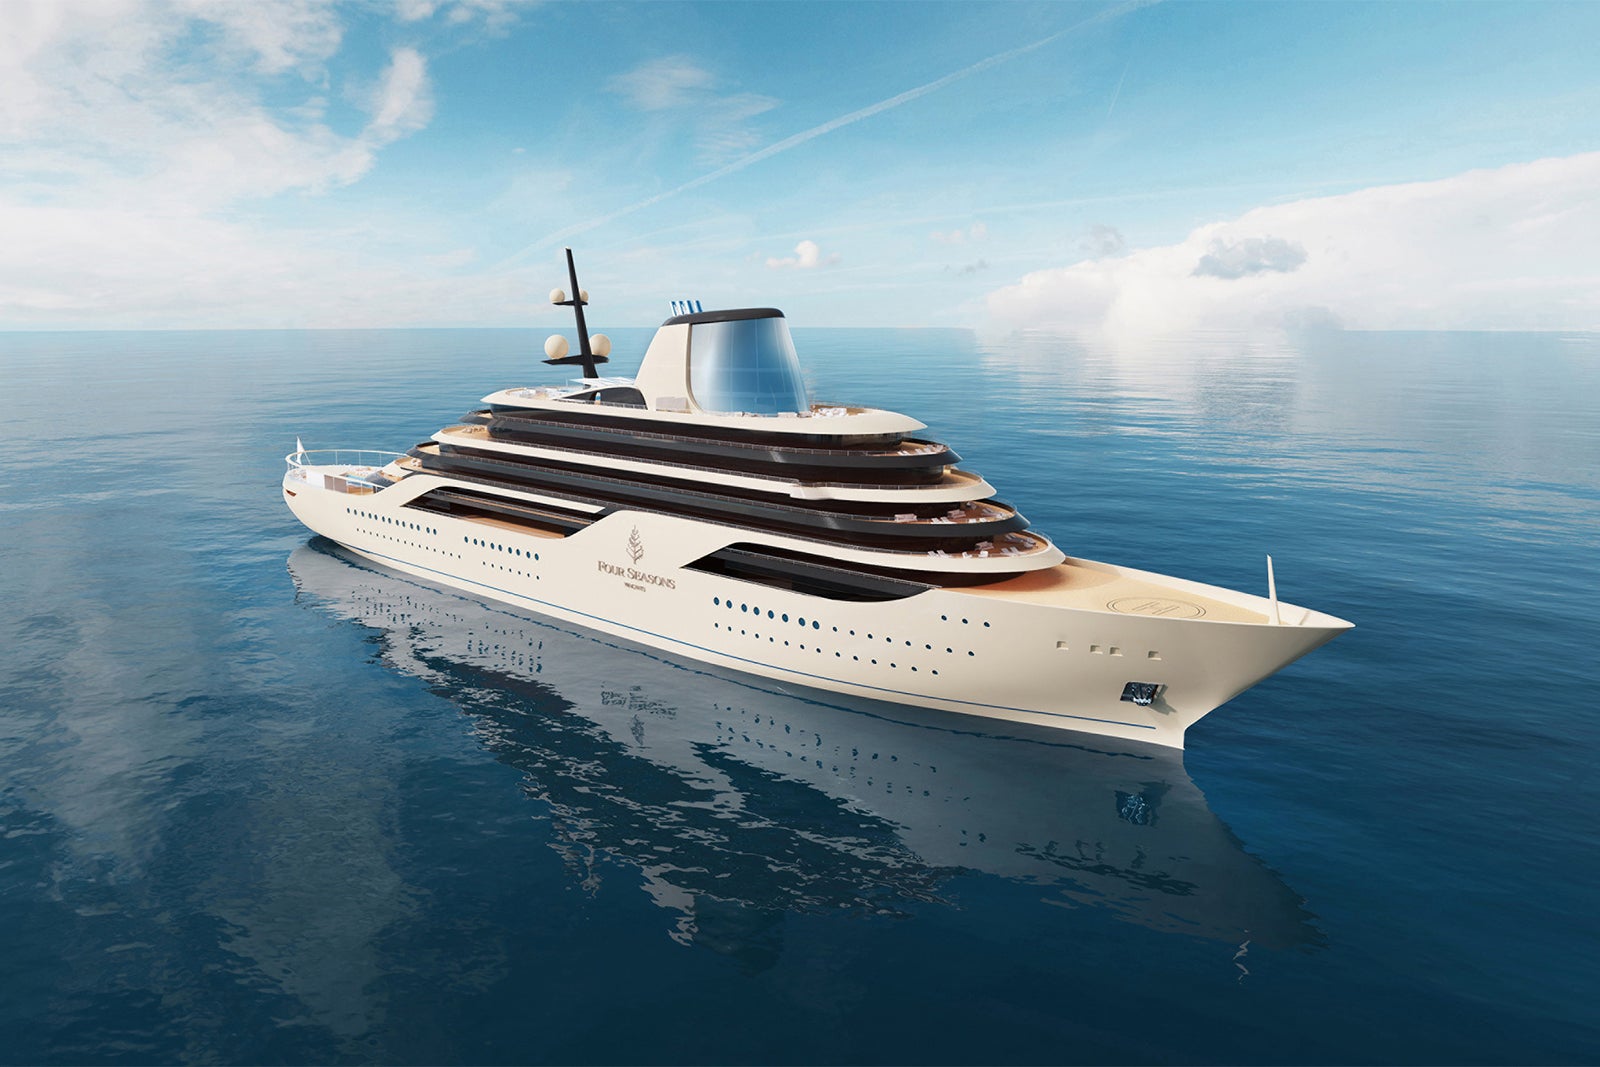 Four Seasons is building a fleet of luxury yachts that will debut in 2025